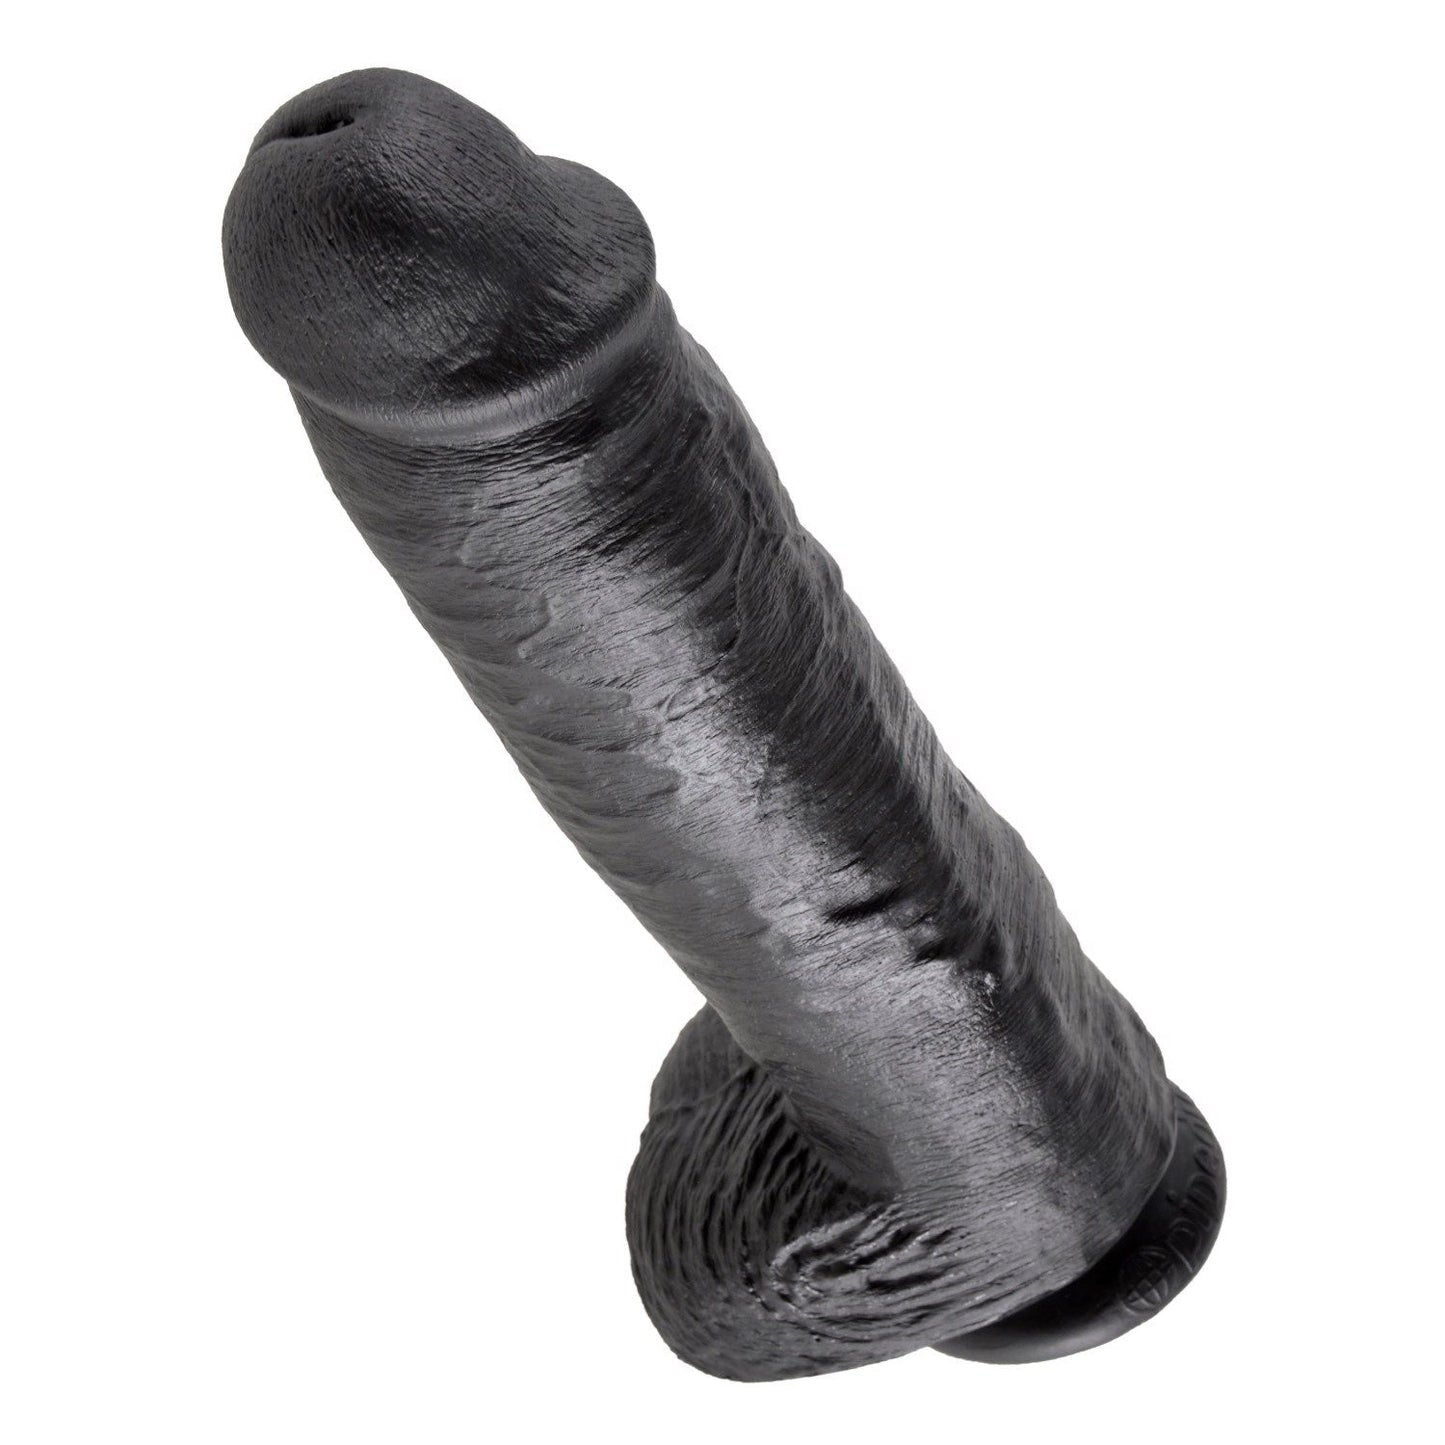 11" Cock With Balls - Black 28 cm (11") Dong